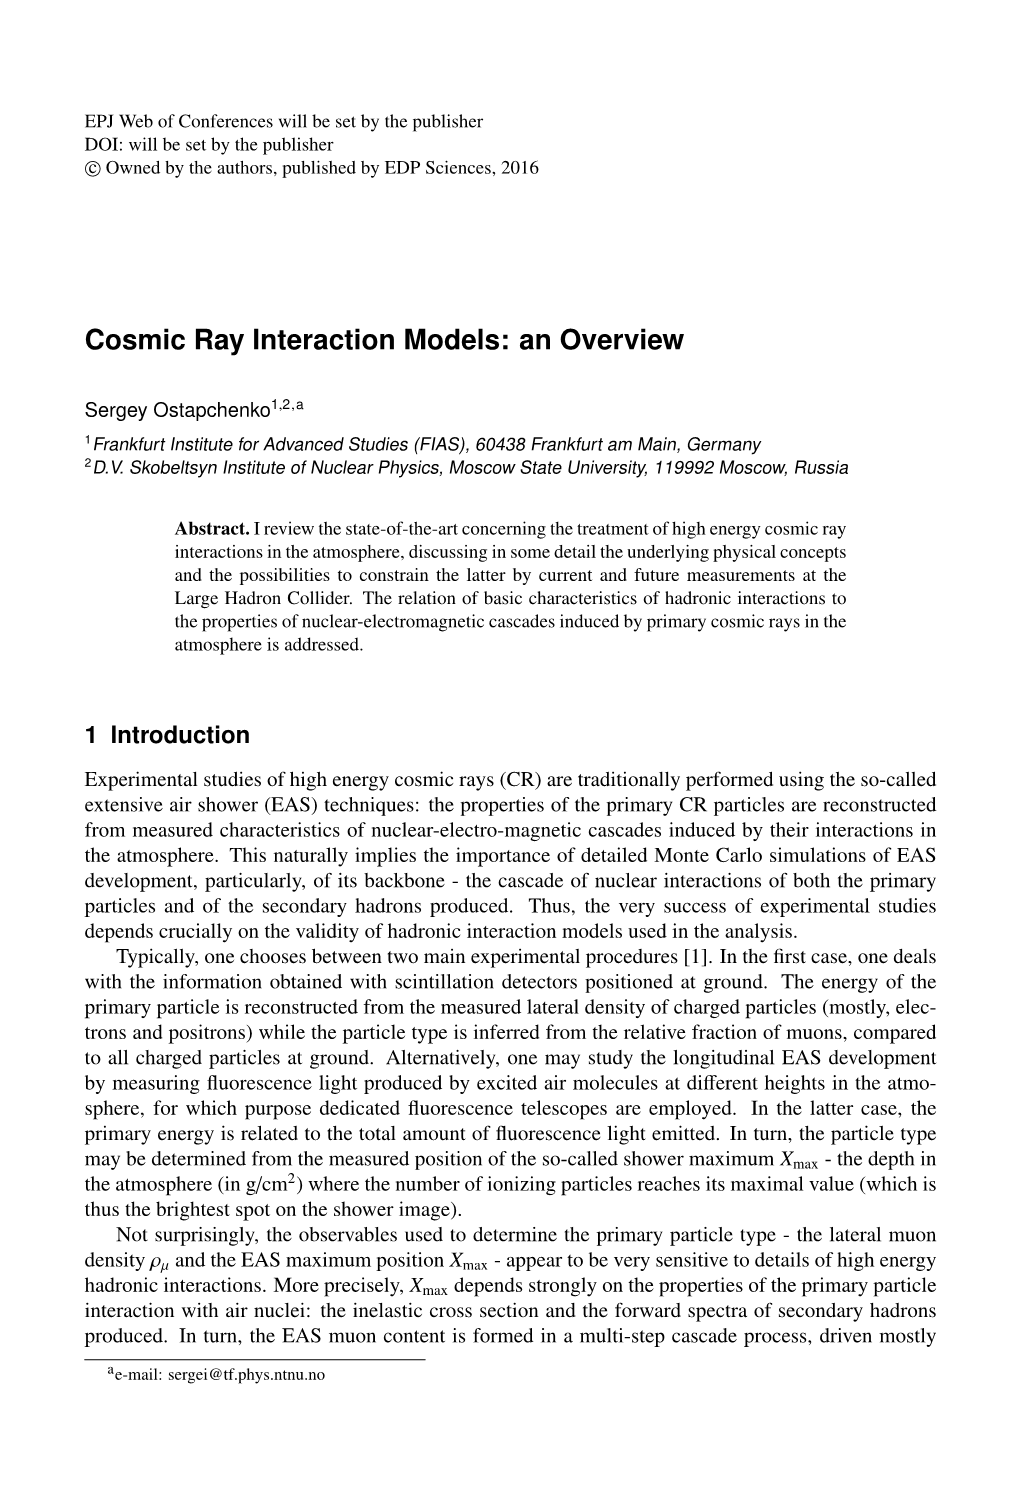 Cosmic Ray Interaction Models: an Overview